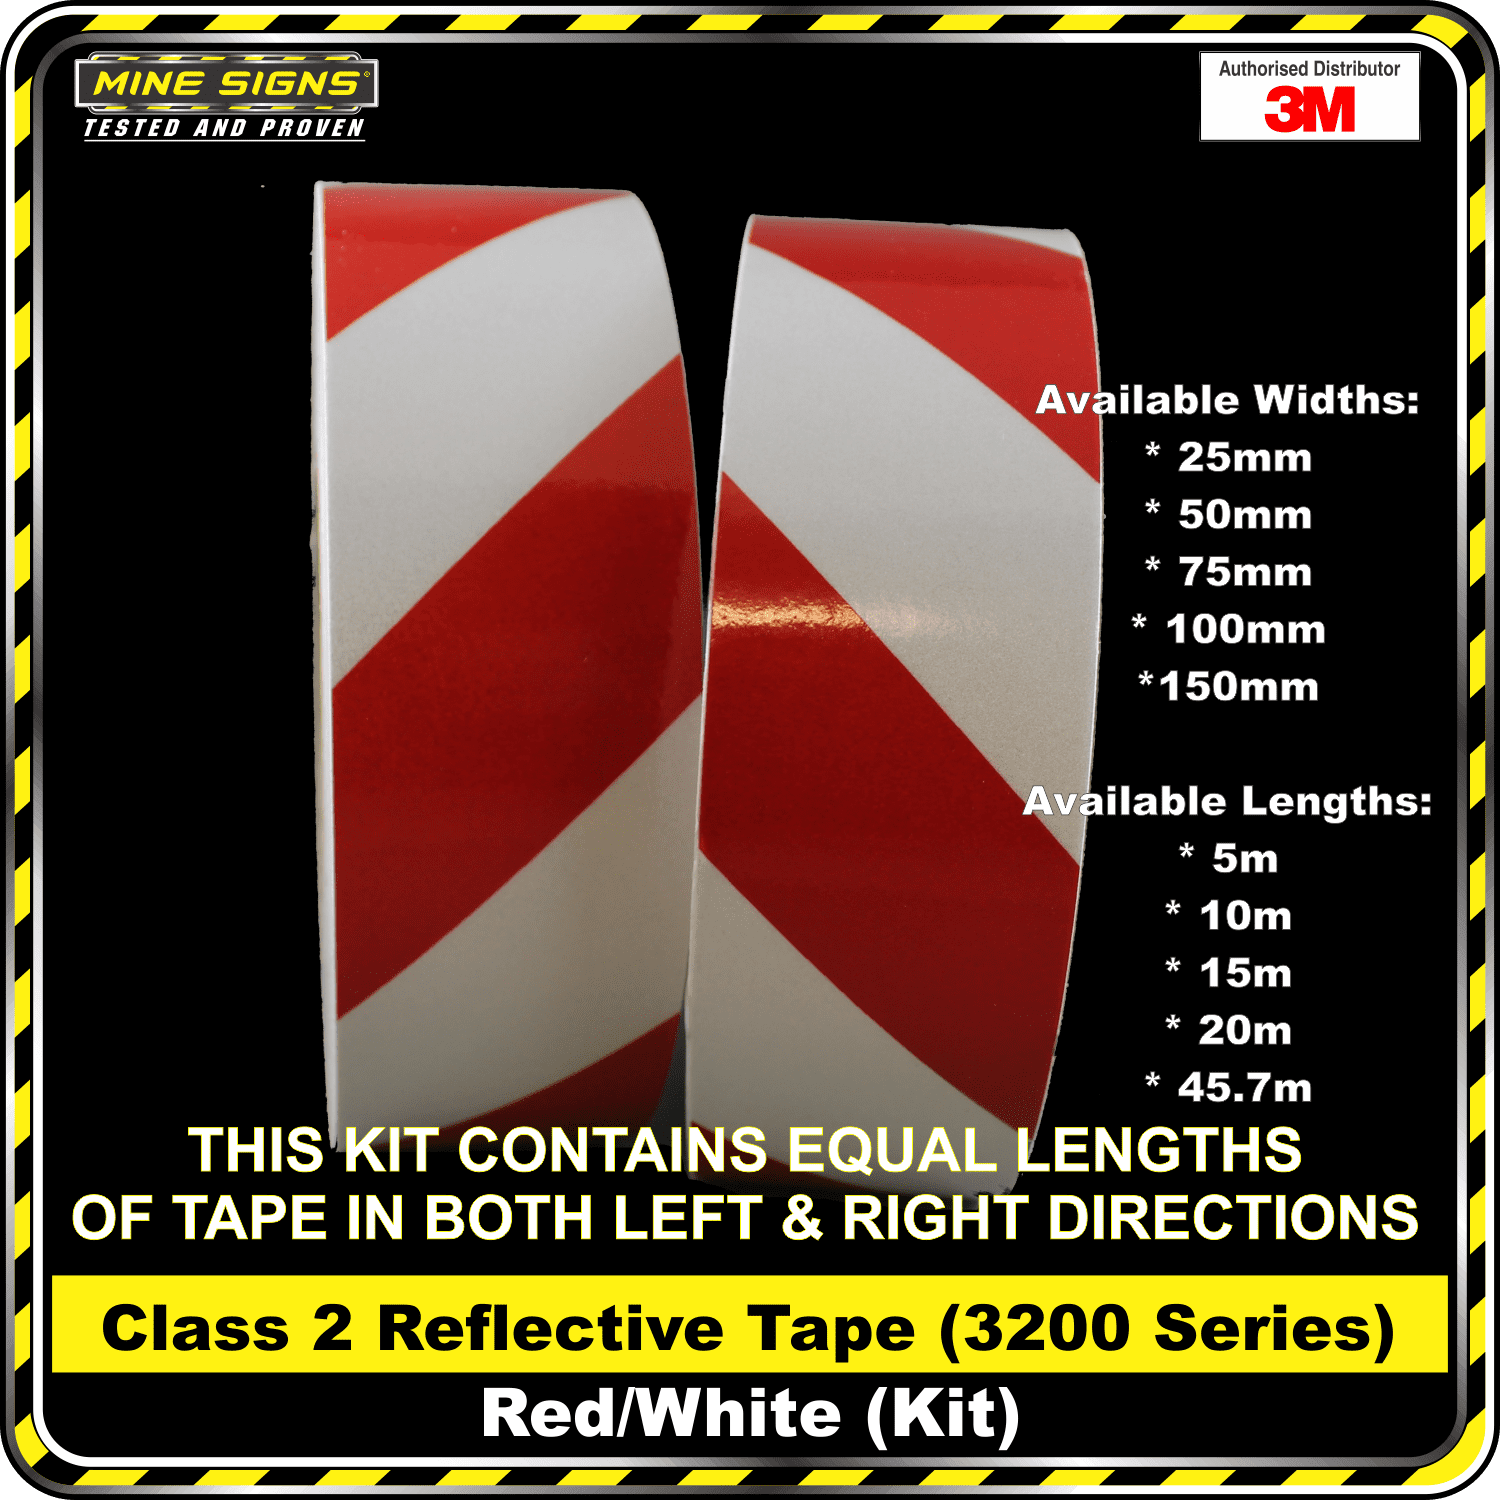 3m red/white class 2 3200 series reflective tape kit